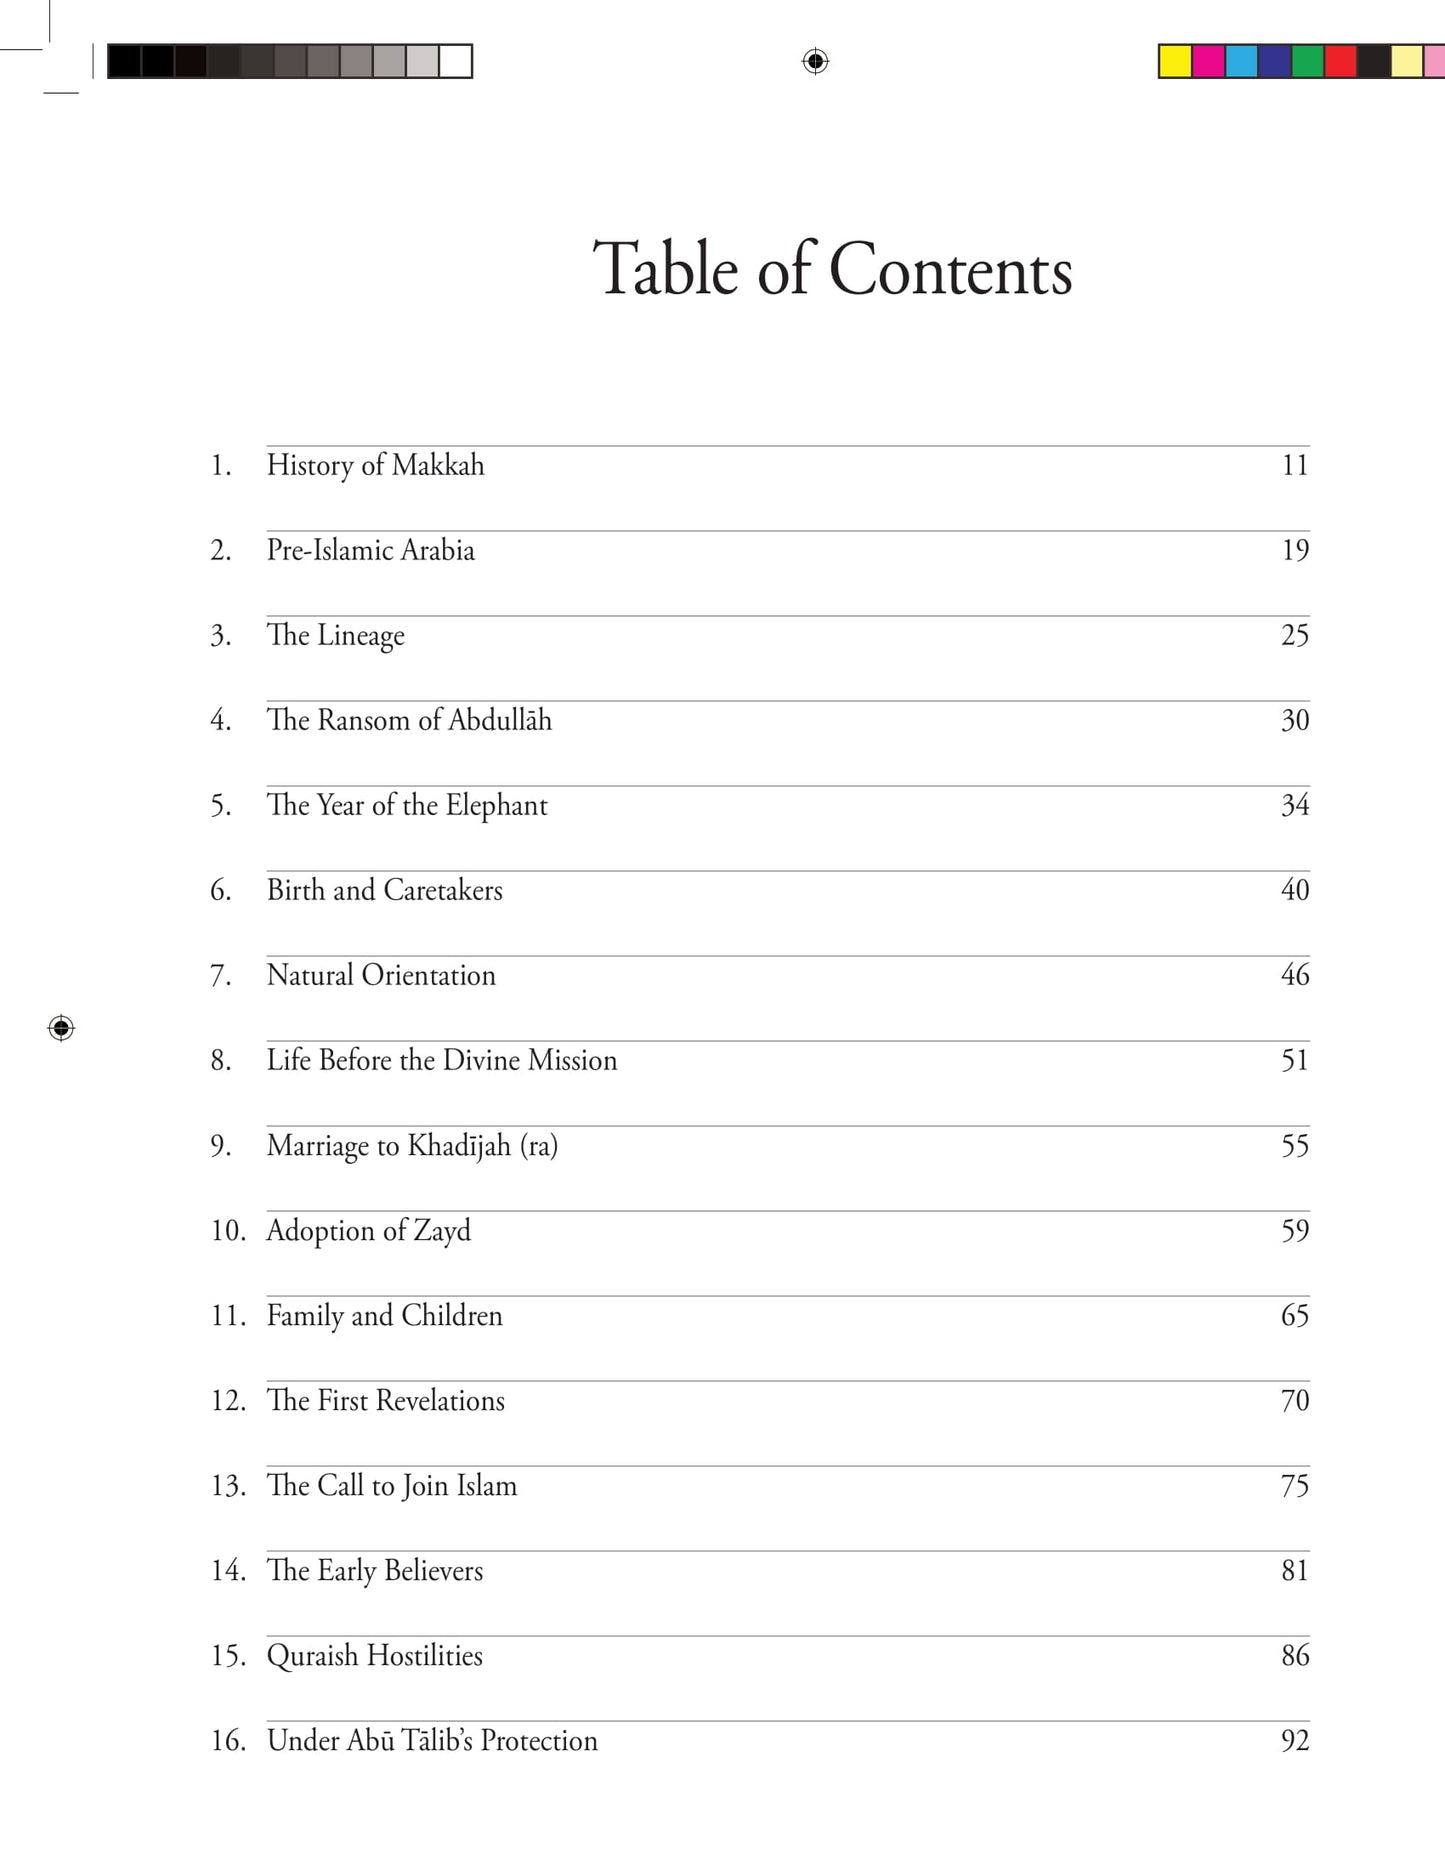 Life of Rasulullah - Makkah Period - Seerah - Weekend Learning Publishers - Table of Contents - Page 1